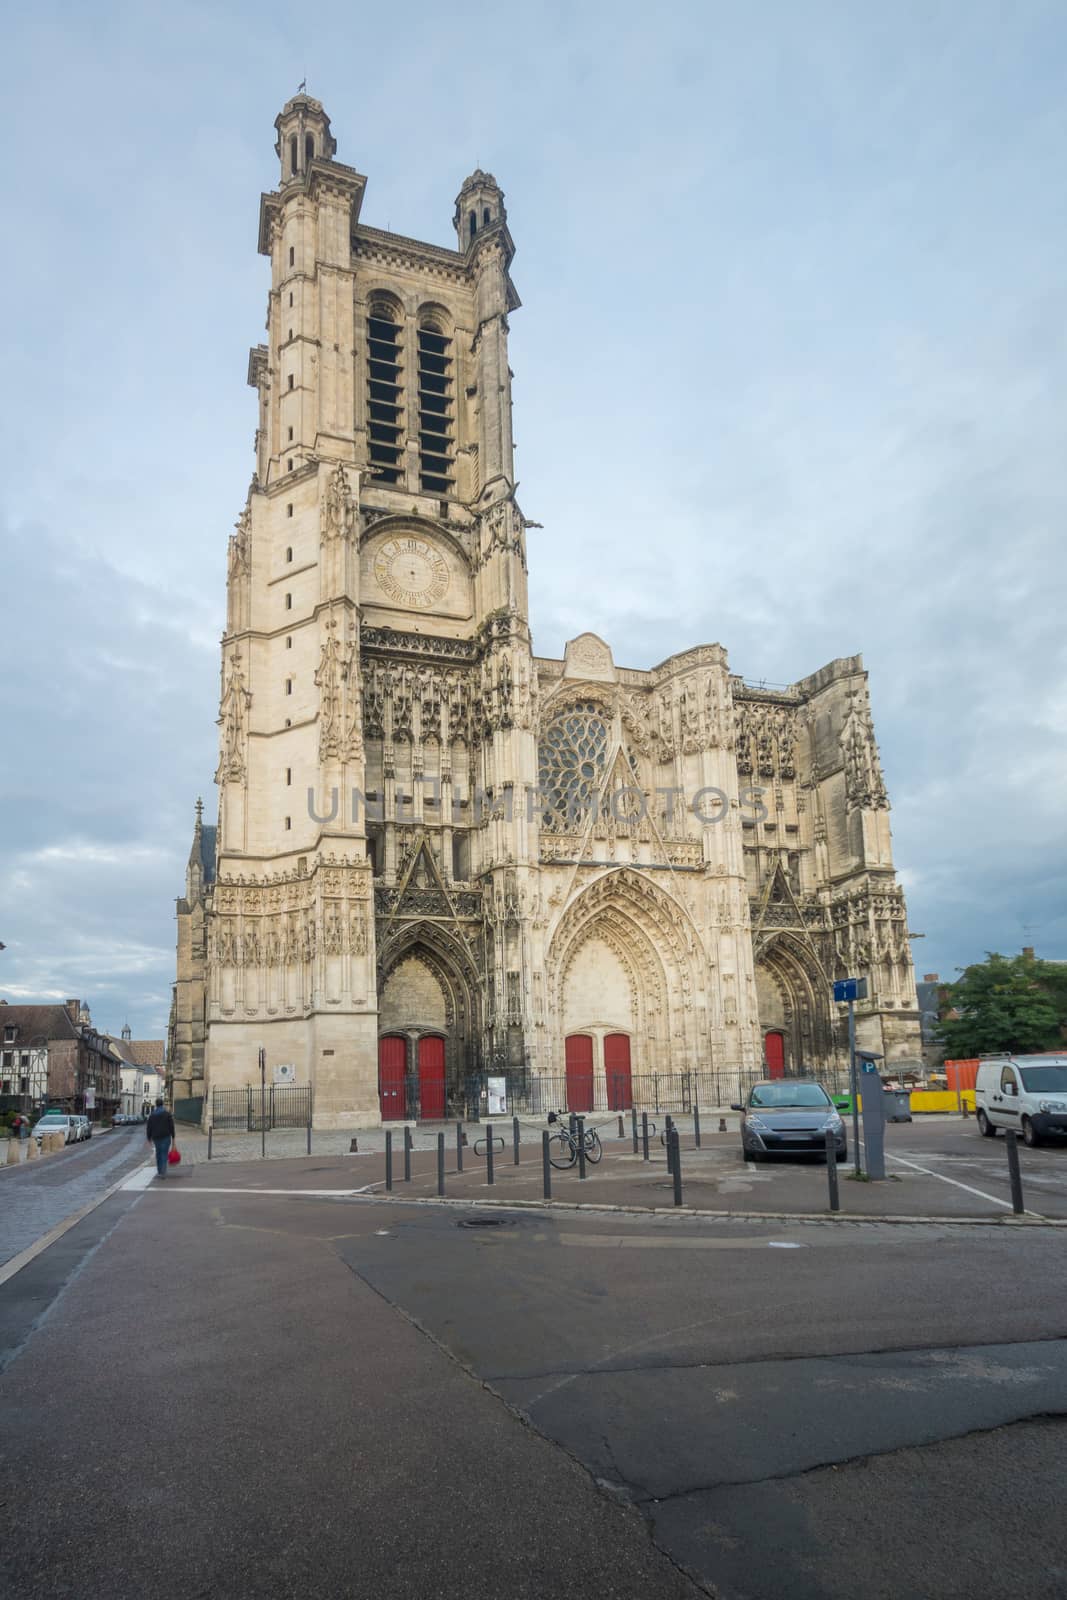 Sunset view of the Cathedral (Saint-Pierre-Saint-Paul), in Troyes, Champagne, France